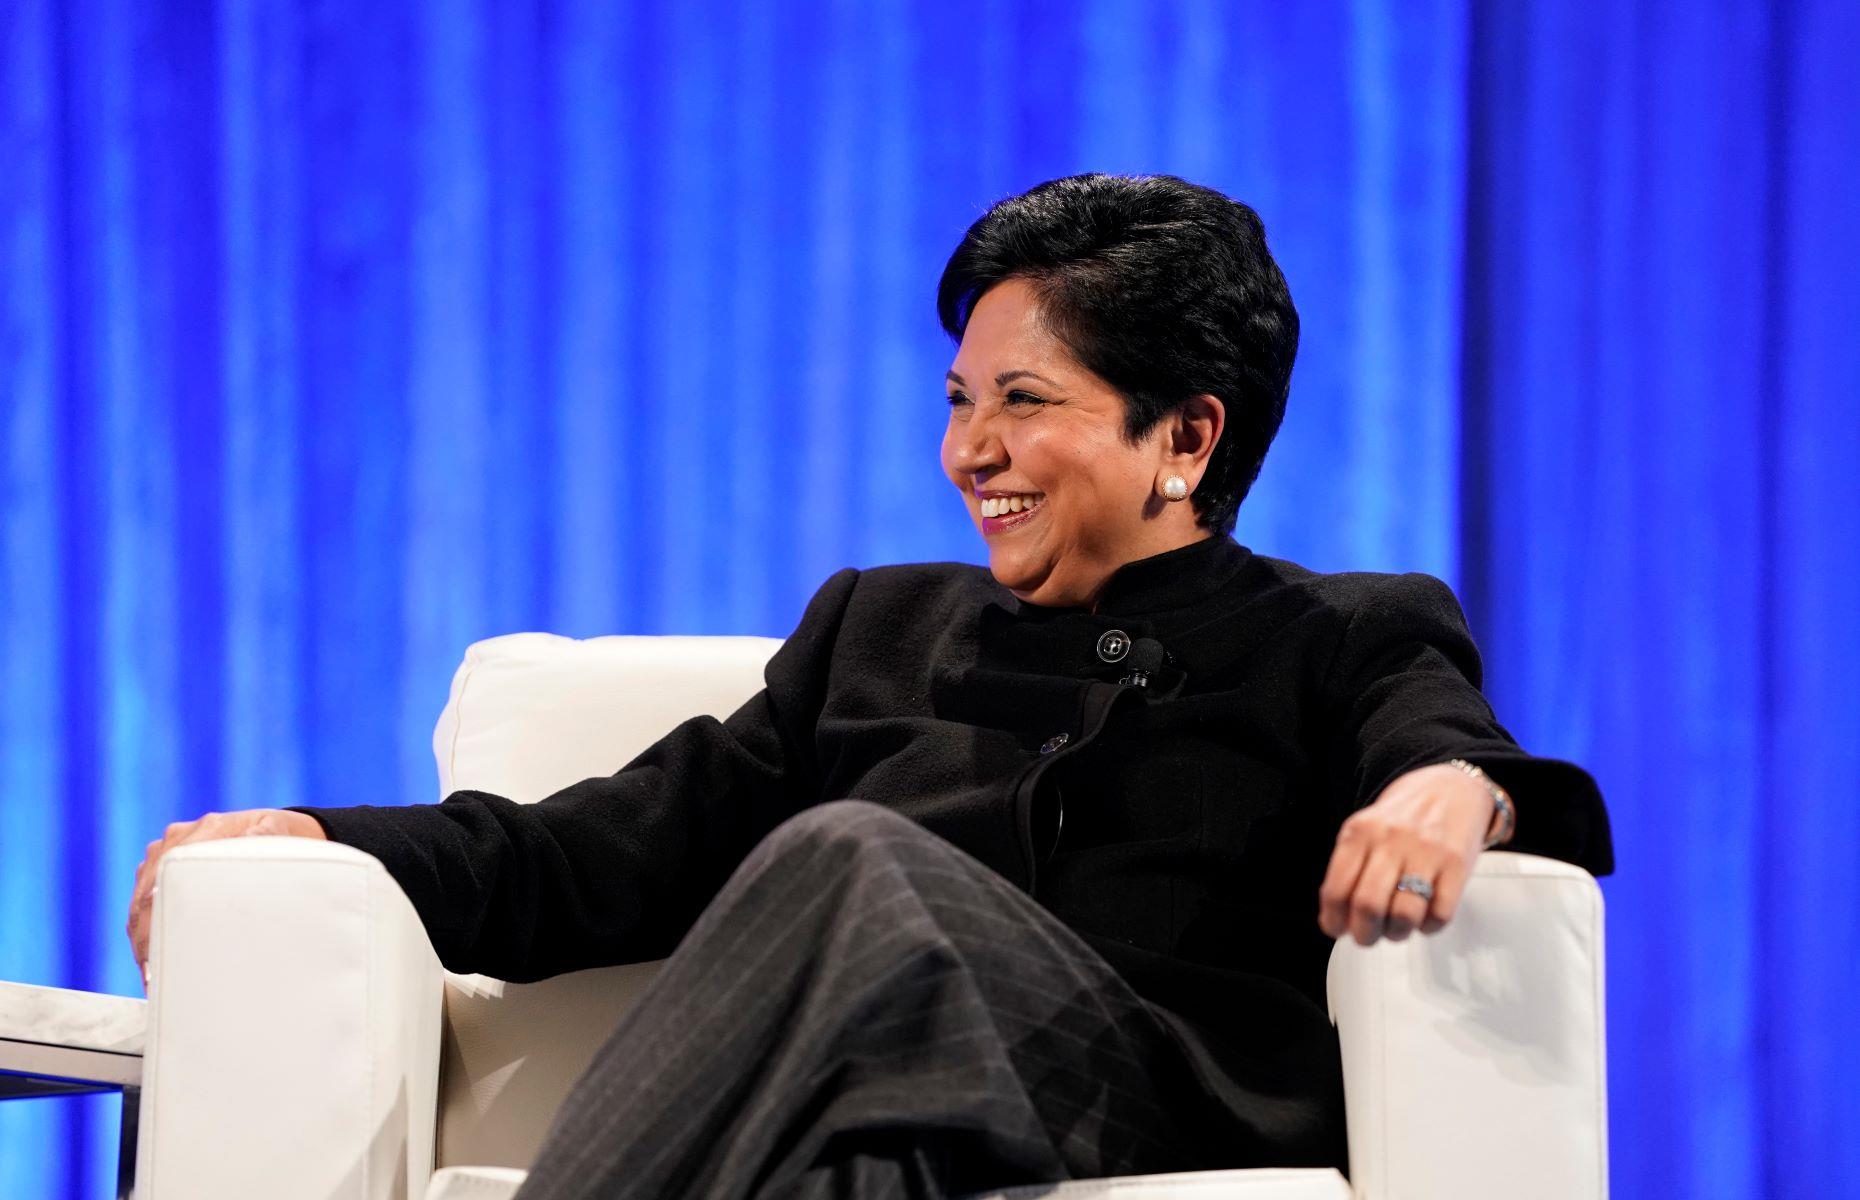 Indra Nooyi has never asked for a pay rise